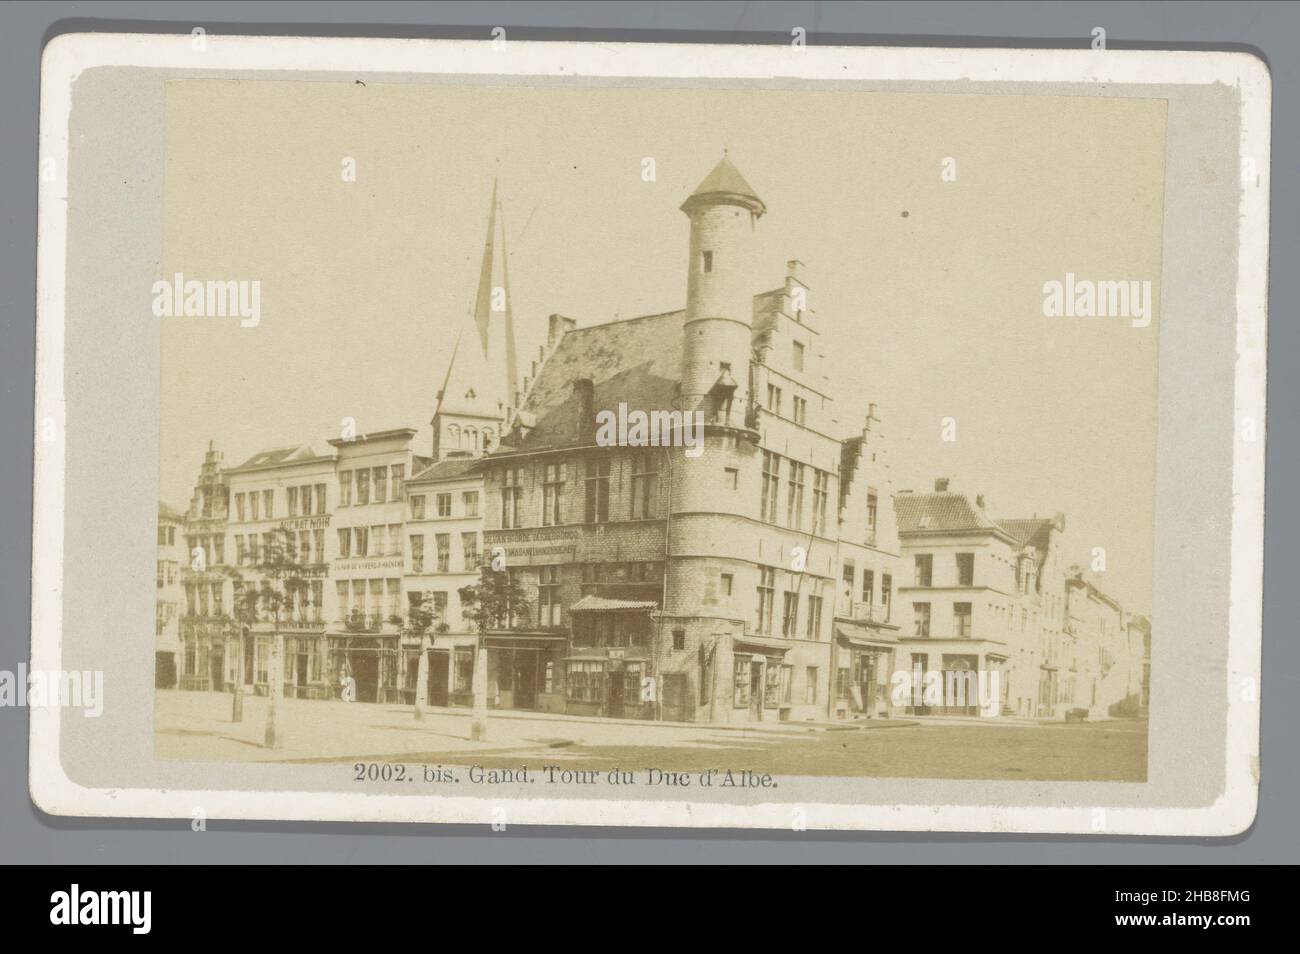 House the Toreken in Ghent, Gand. Tour du Duc d'Albe (title on object), anonymous, Ghent, 1855 - 1885, paper, cardboard, albumen print, height 107 mm × width 68 mm Stock Photo